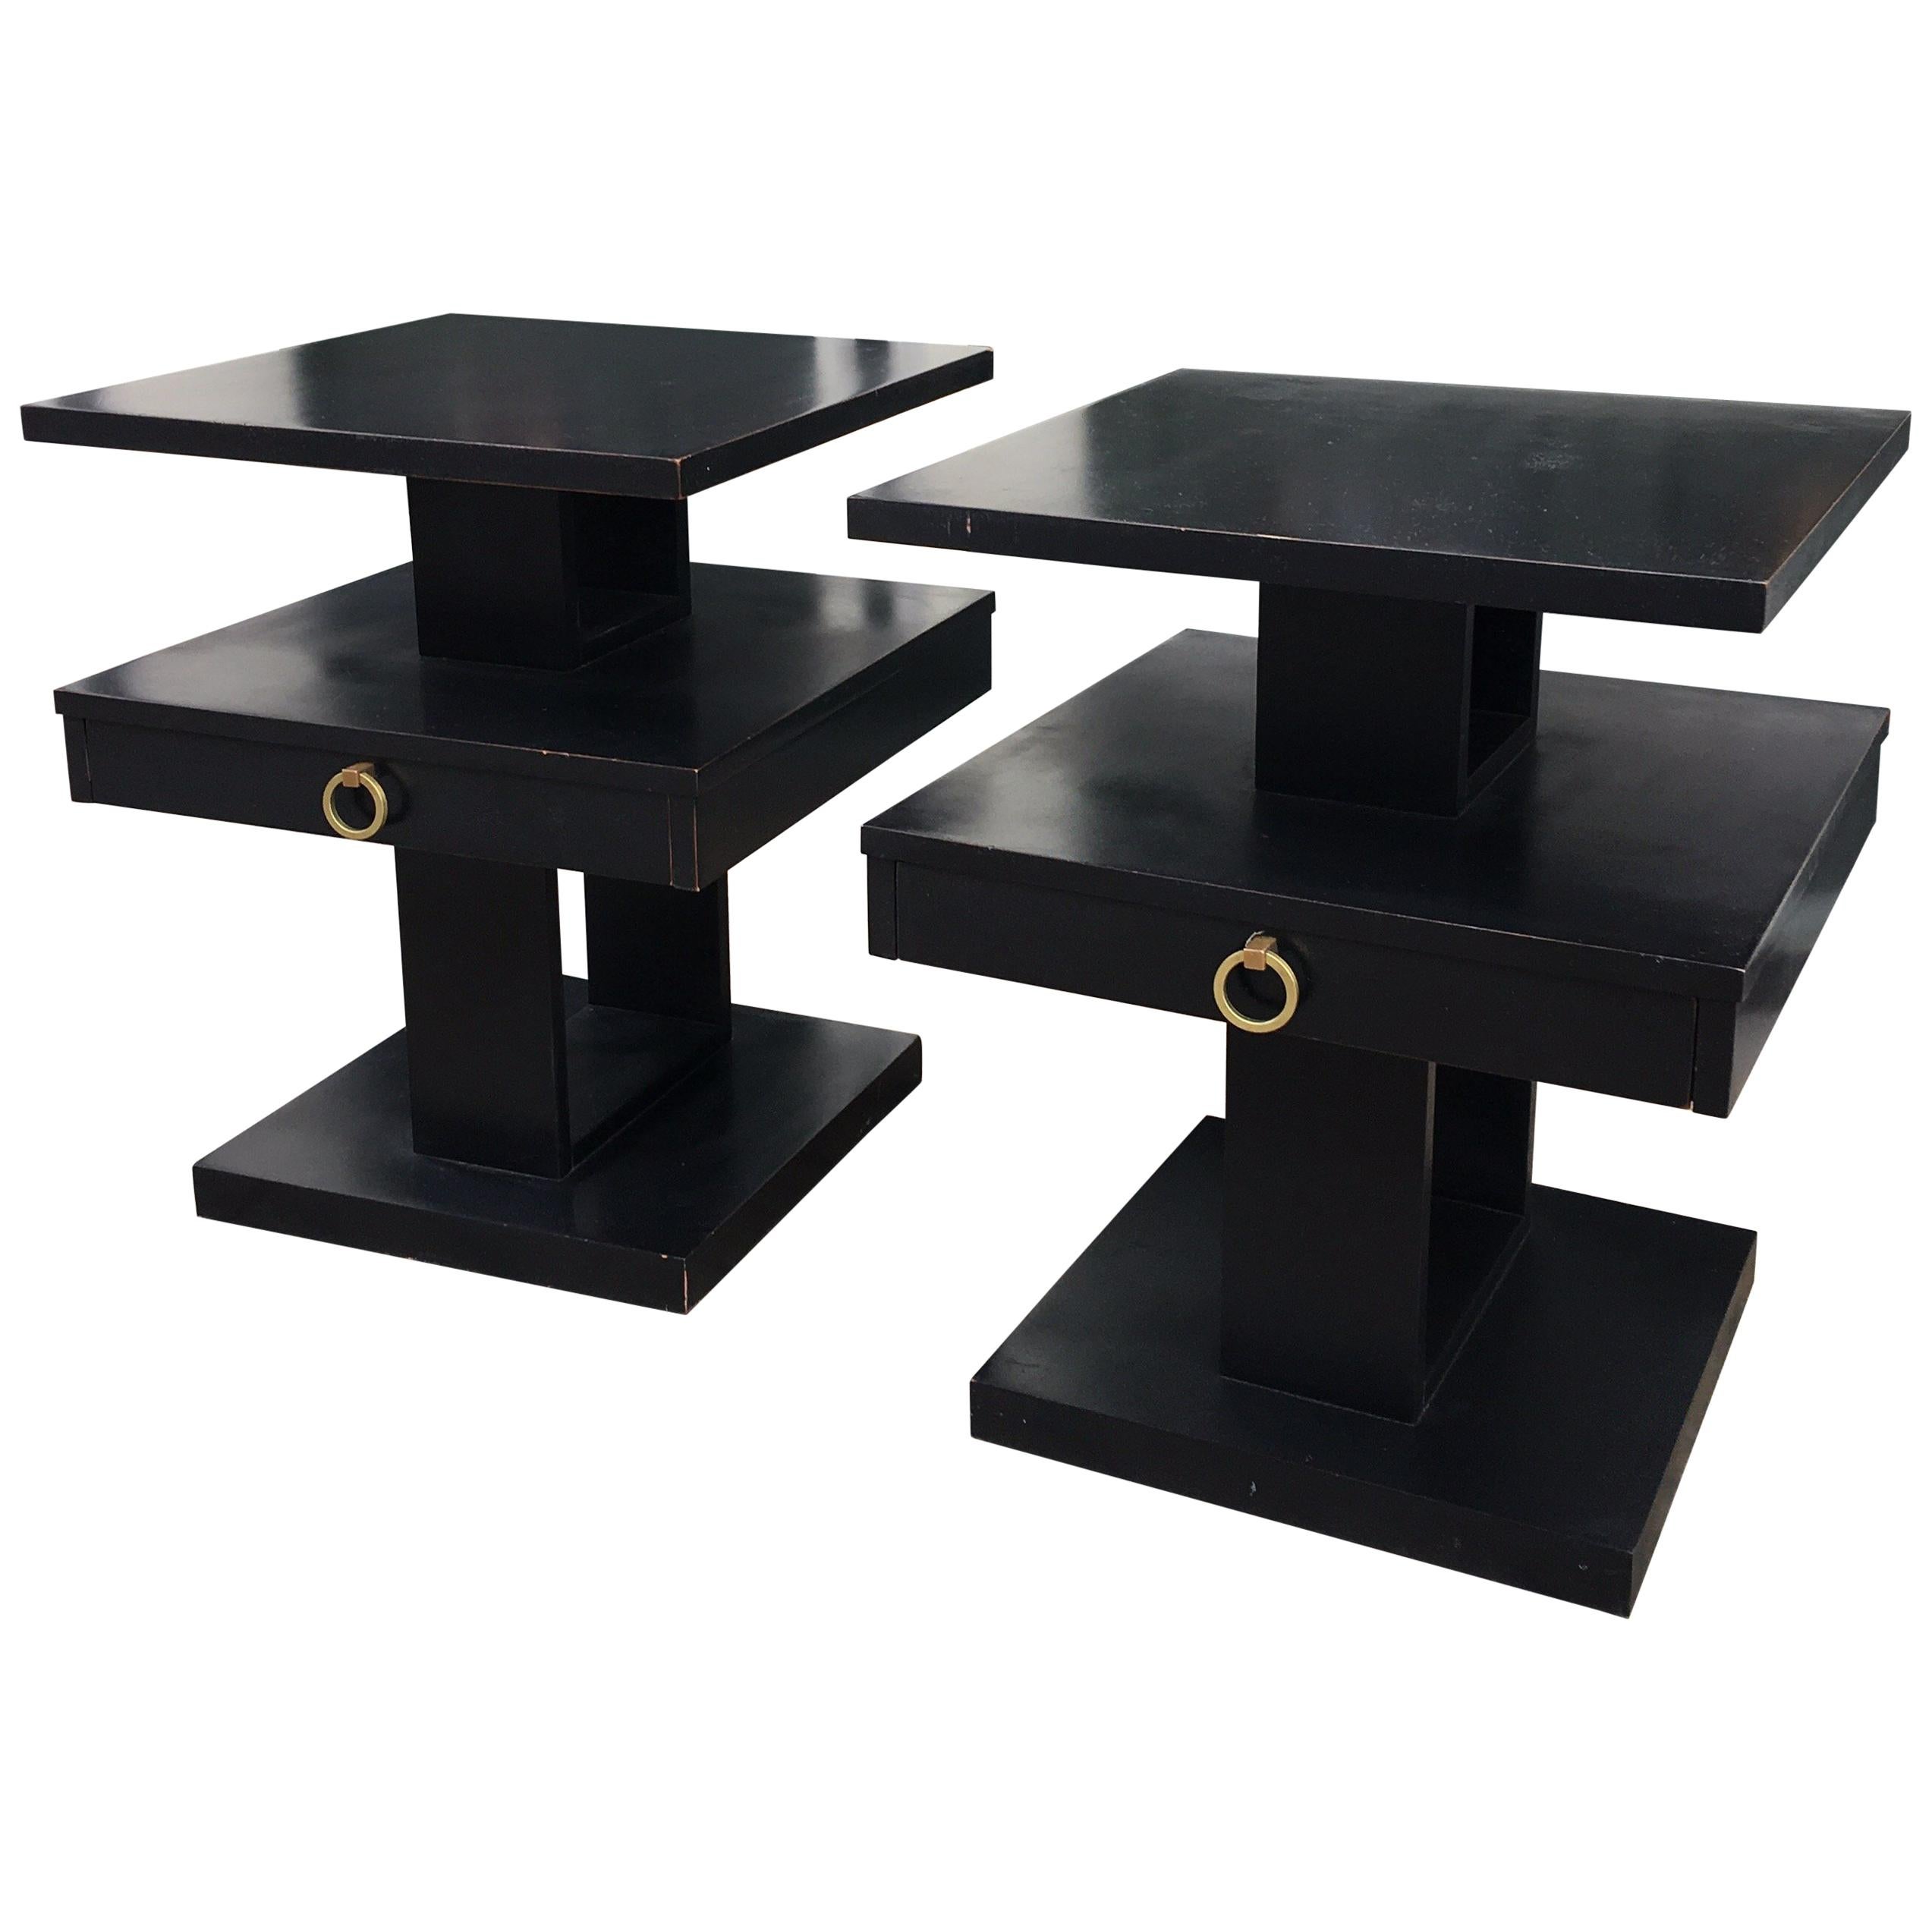 Pair of Lane Stacked End Tables in Black